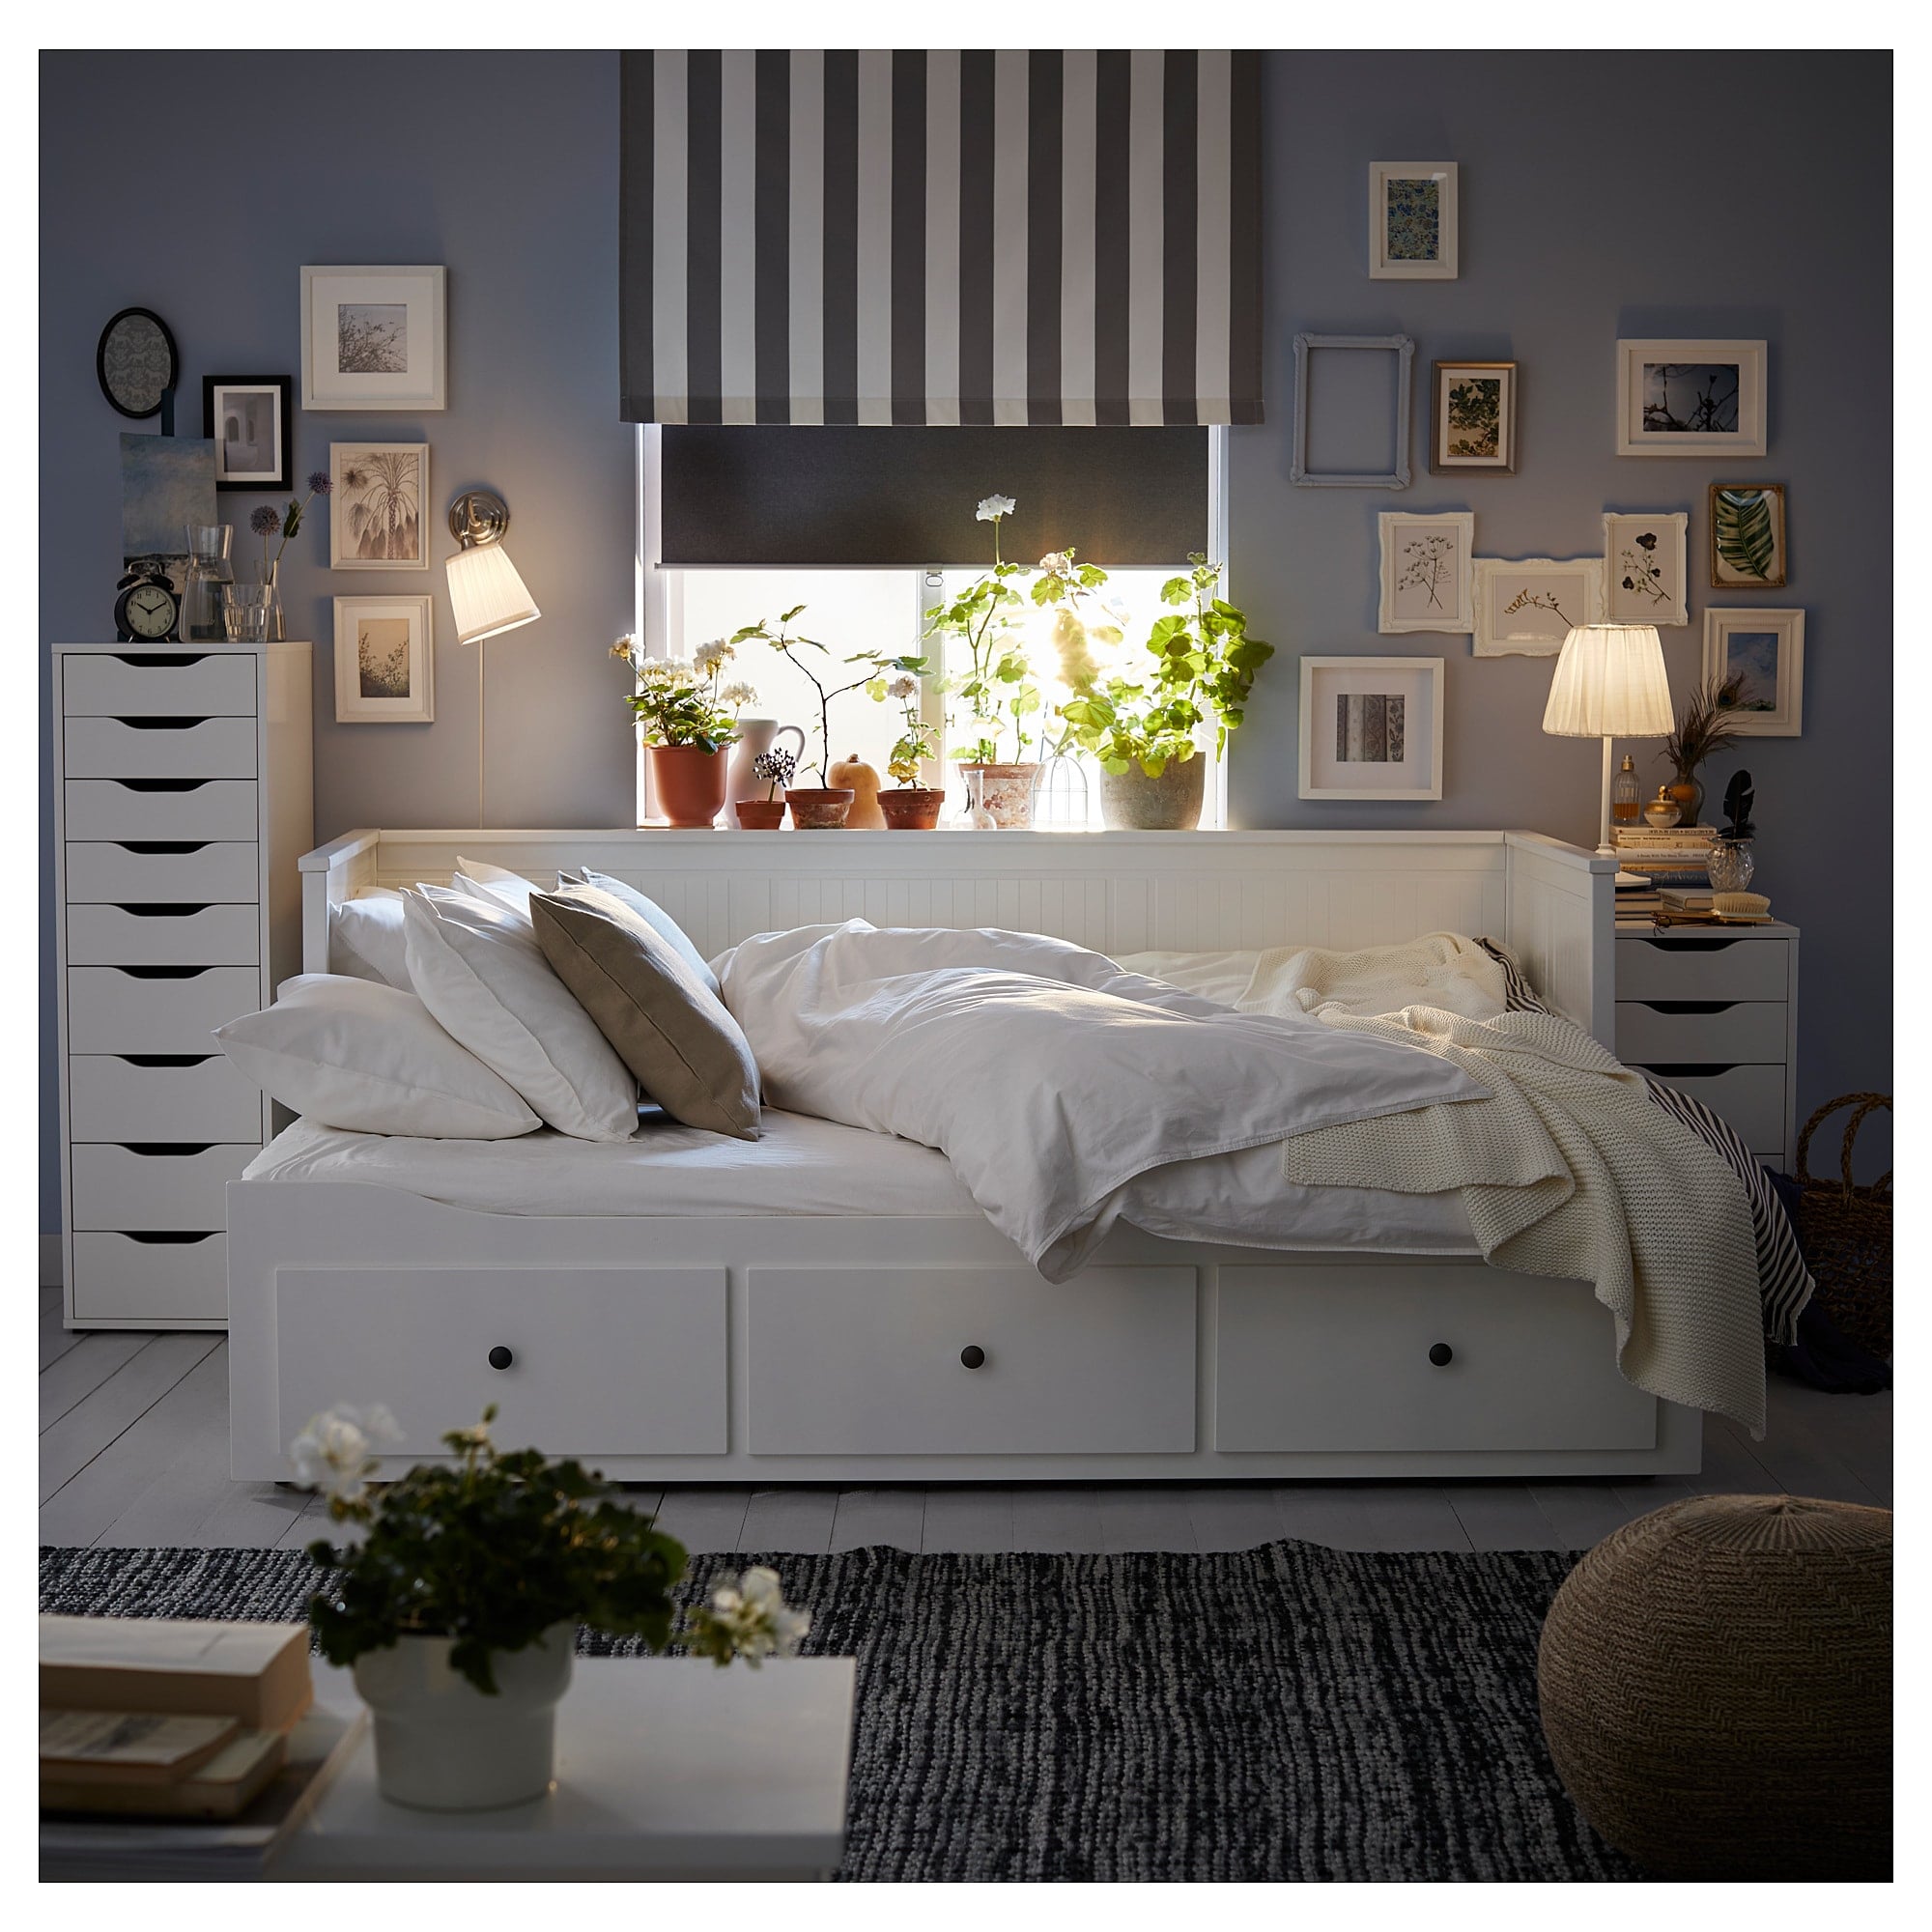 Ikea Dorm Room Ideas / Dorm Room Design Must Have Essentials Decor Ideas - Ikea, the haven for all things cheap and beautiful.